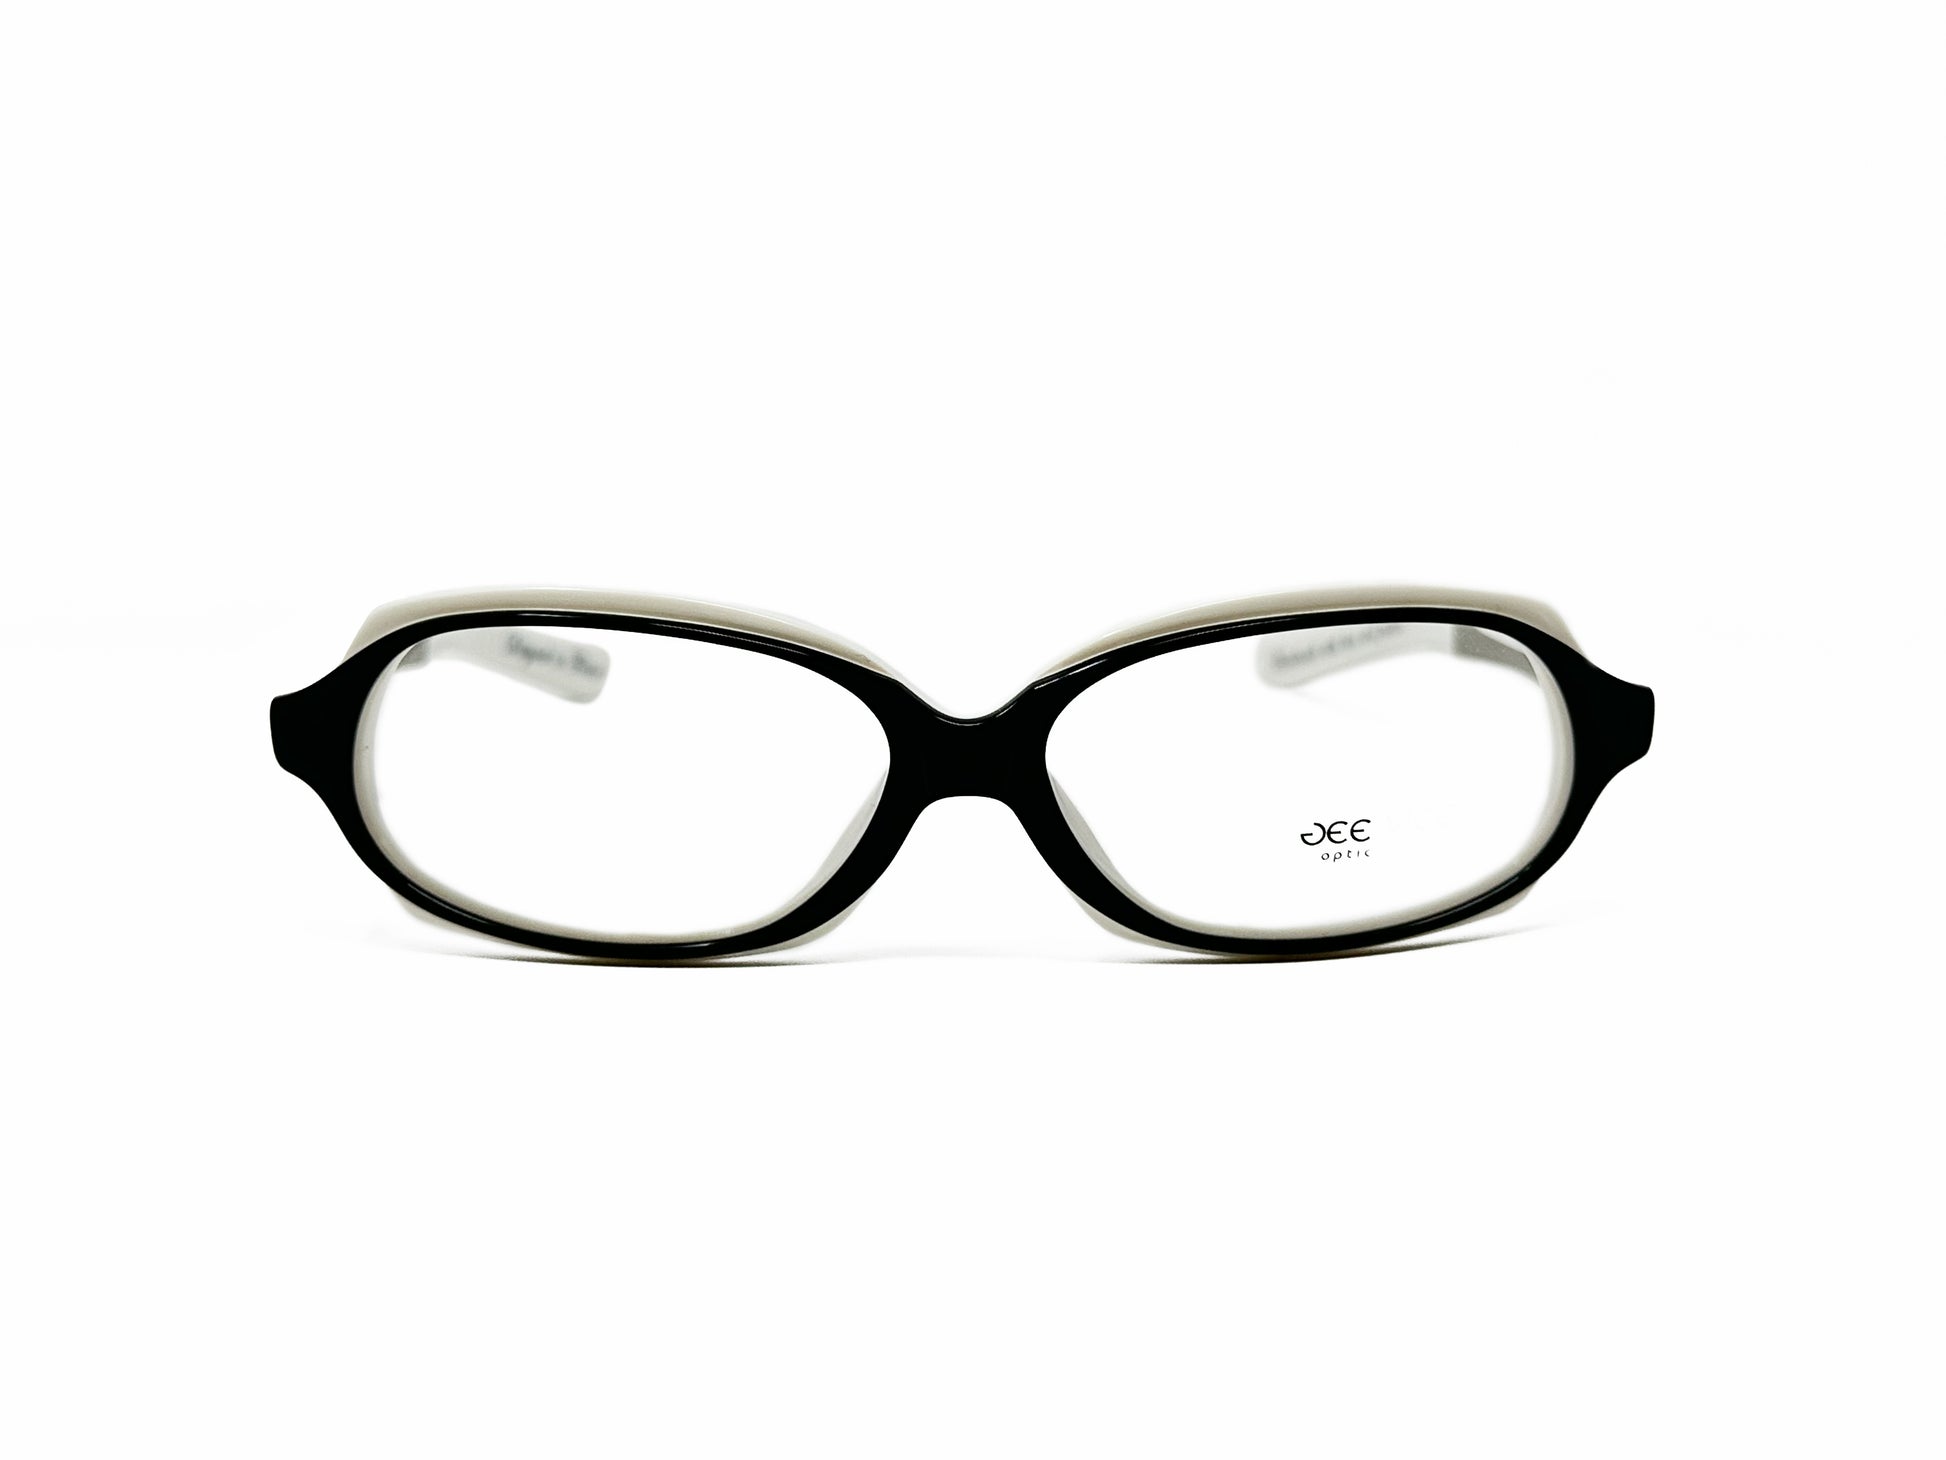 Gee Vice uplifted, curved, rectangular, optical frame with acetate front and metal temples. Model: Premiere. Color:Black with white trim. Front view.